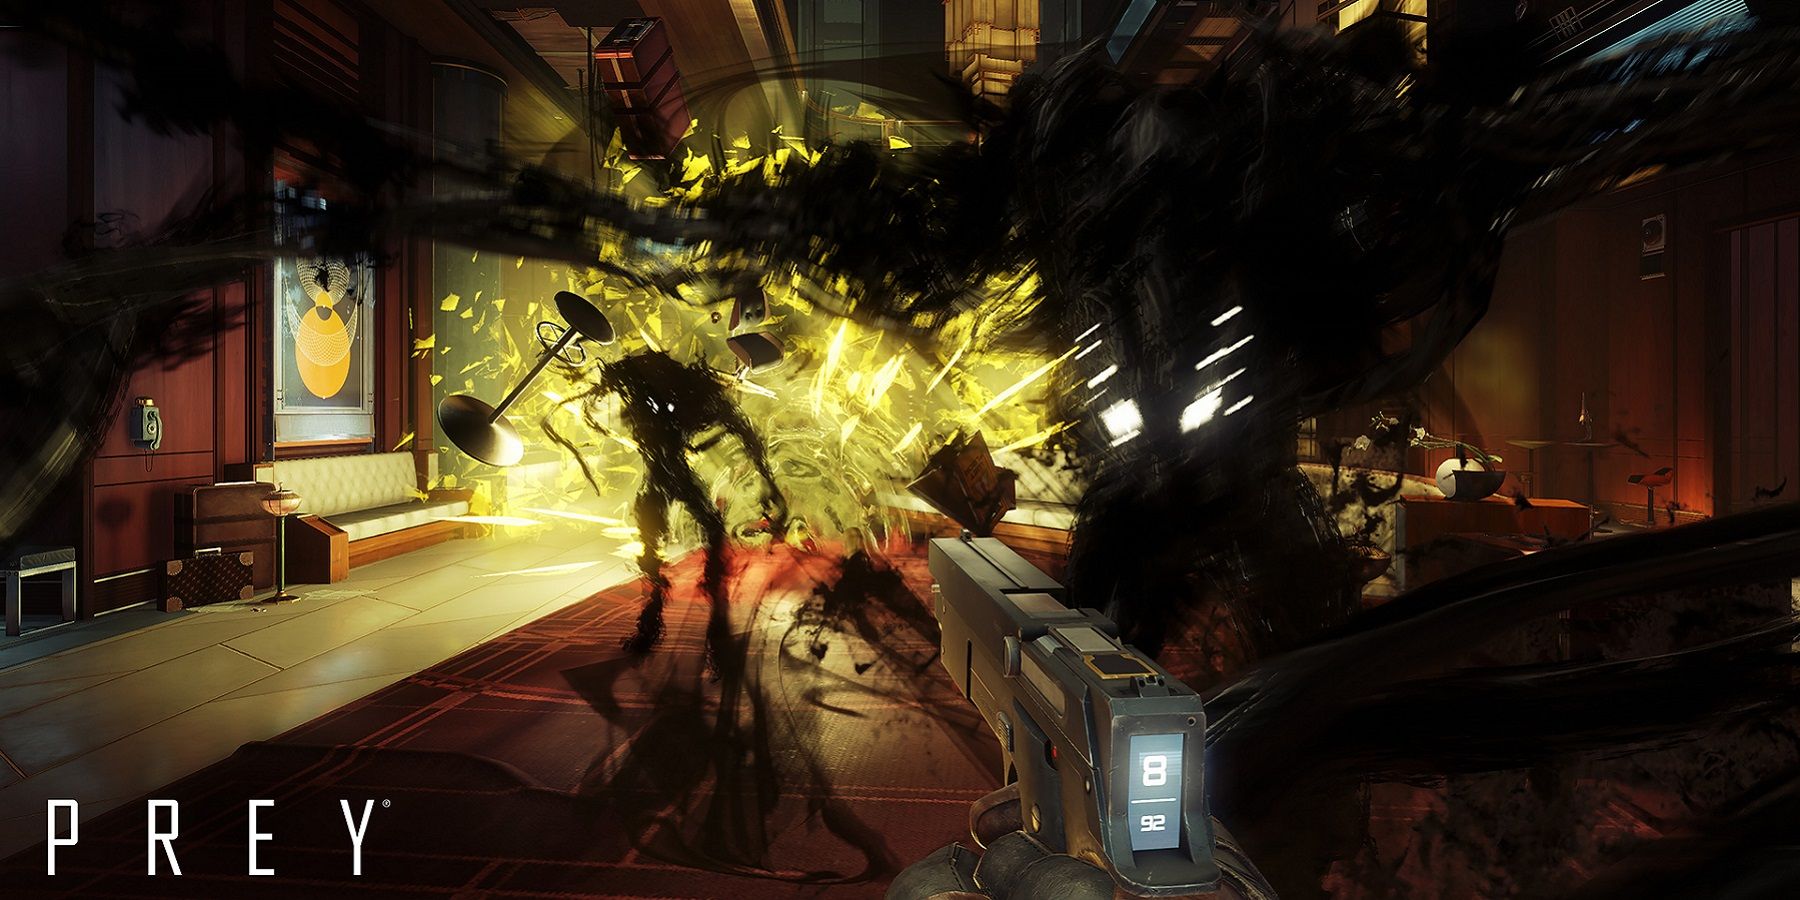 Image from Prey (2017) showing some of the Typhon attacking the main character.